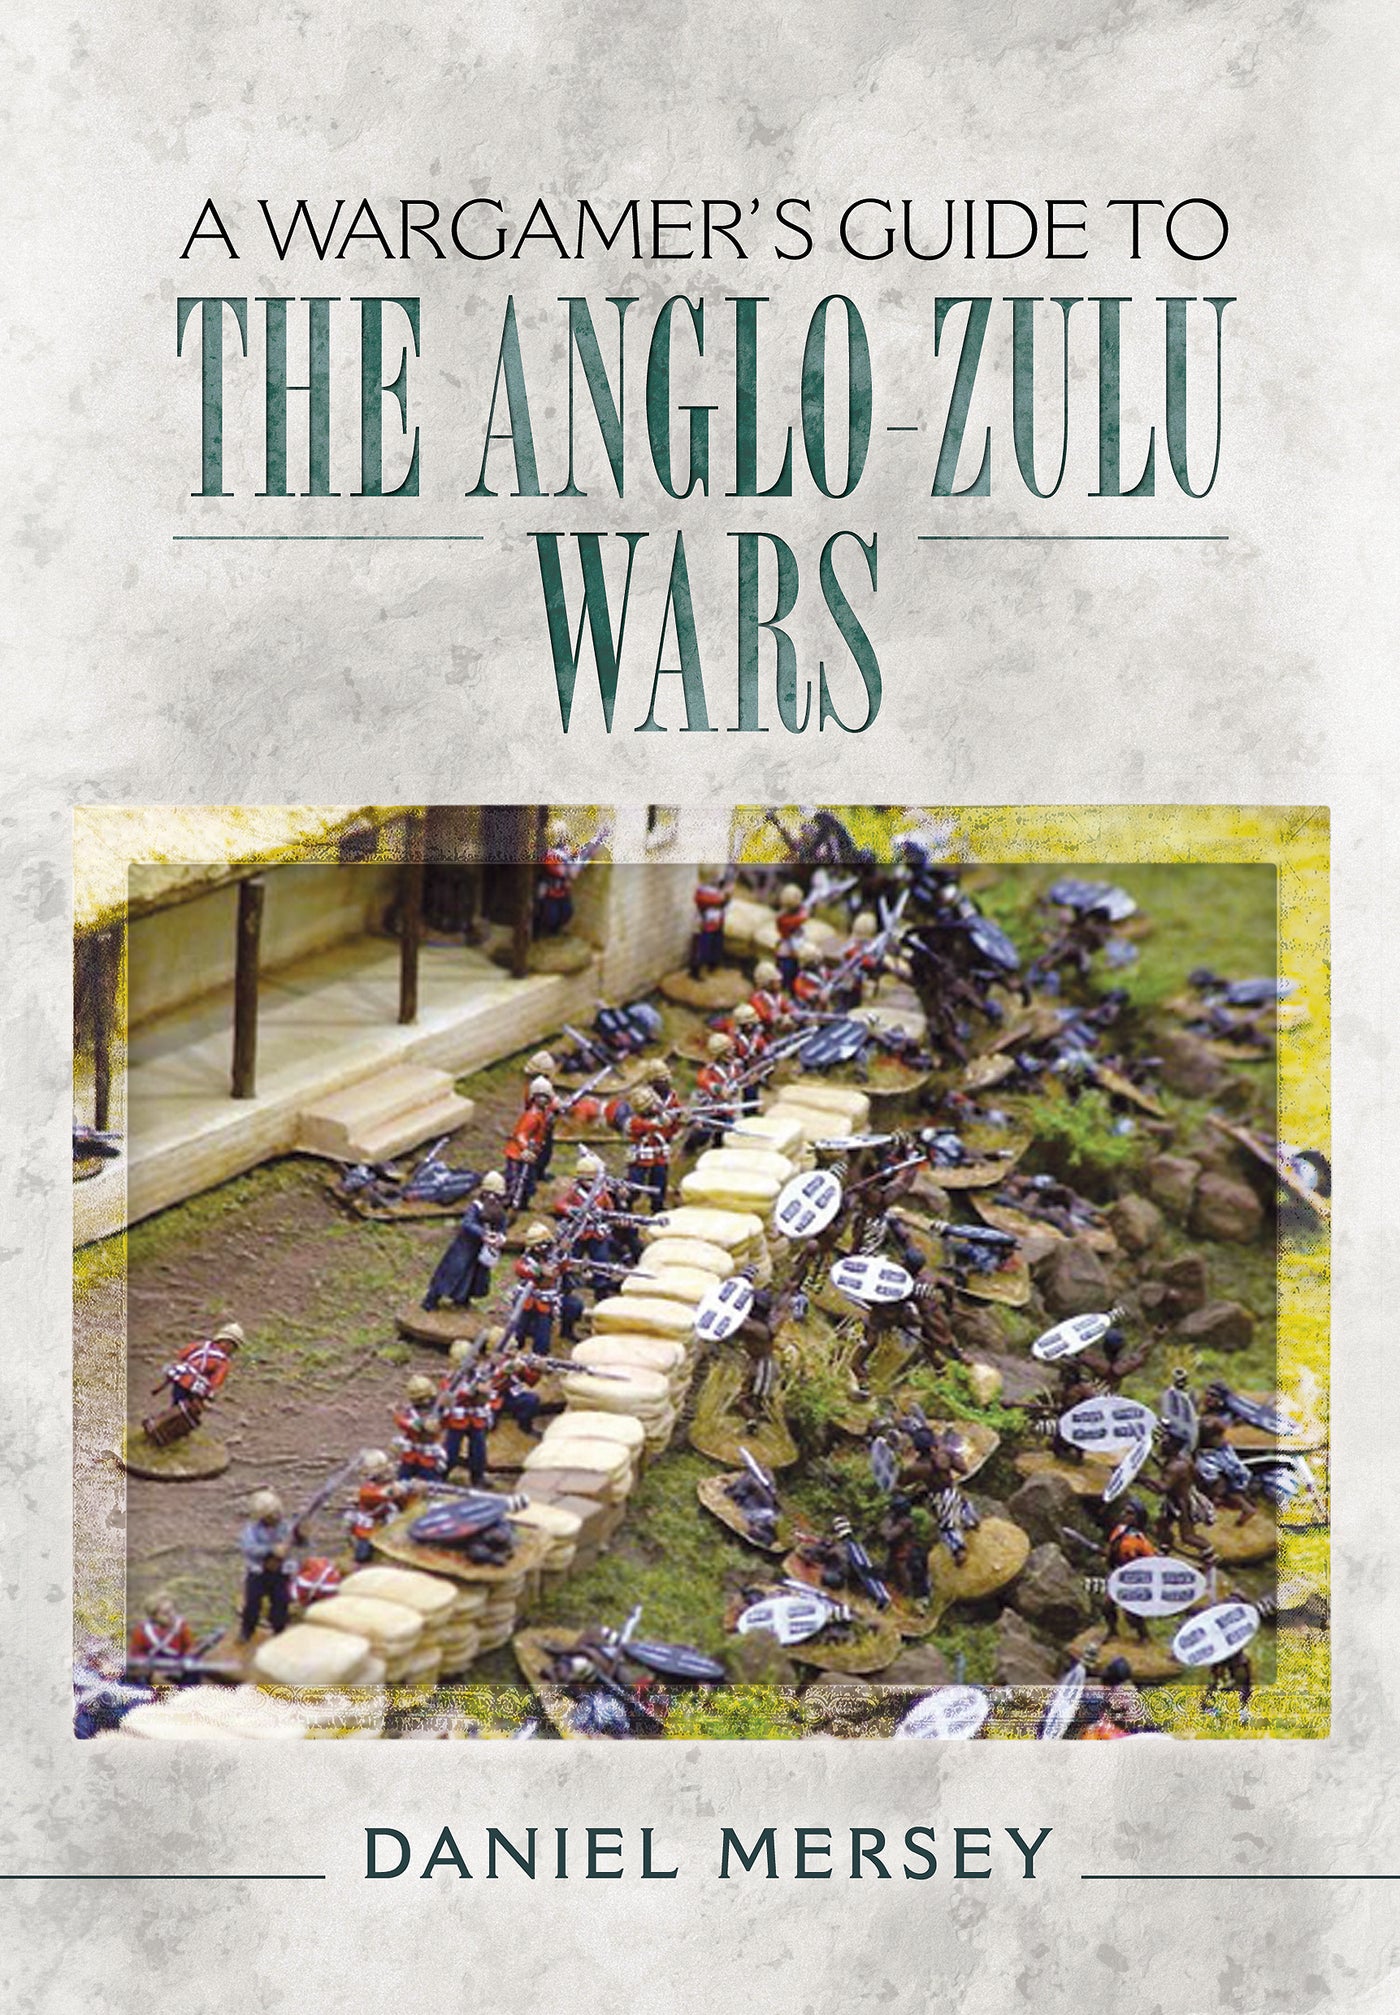 A Wargamer's Guide to The Anglo-Zulu War